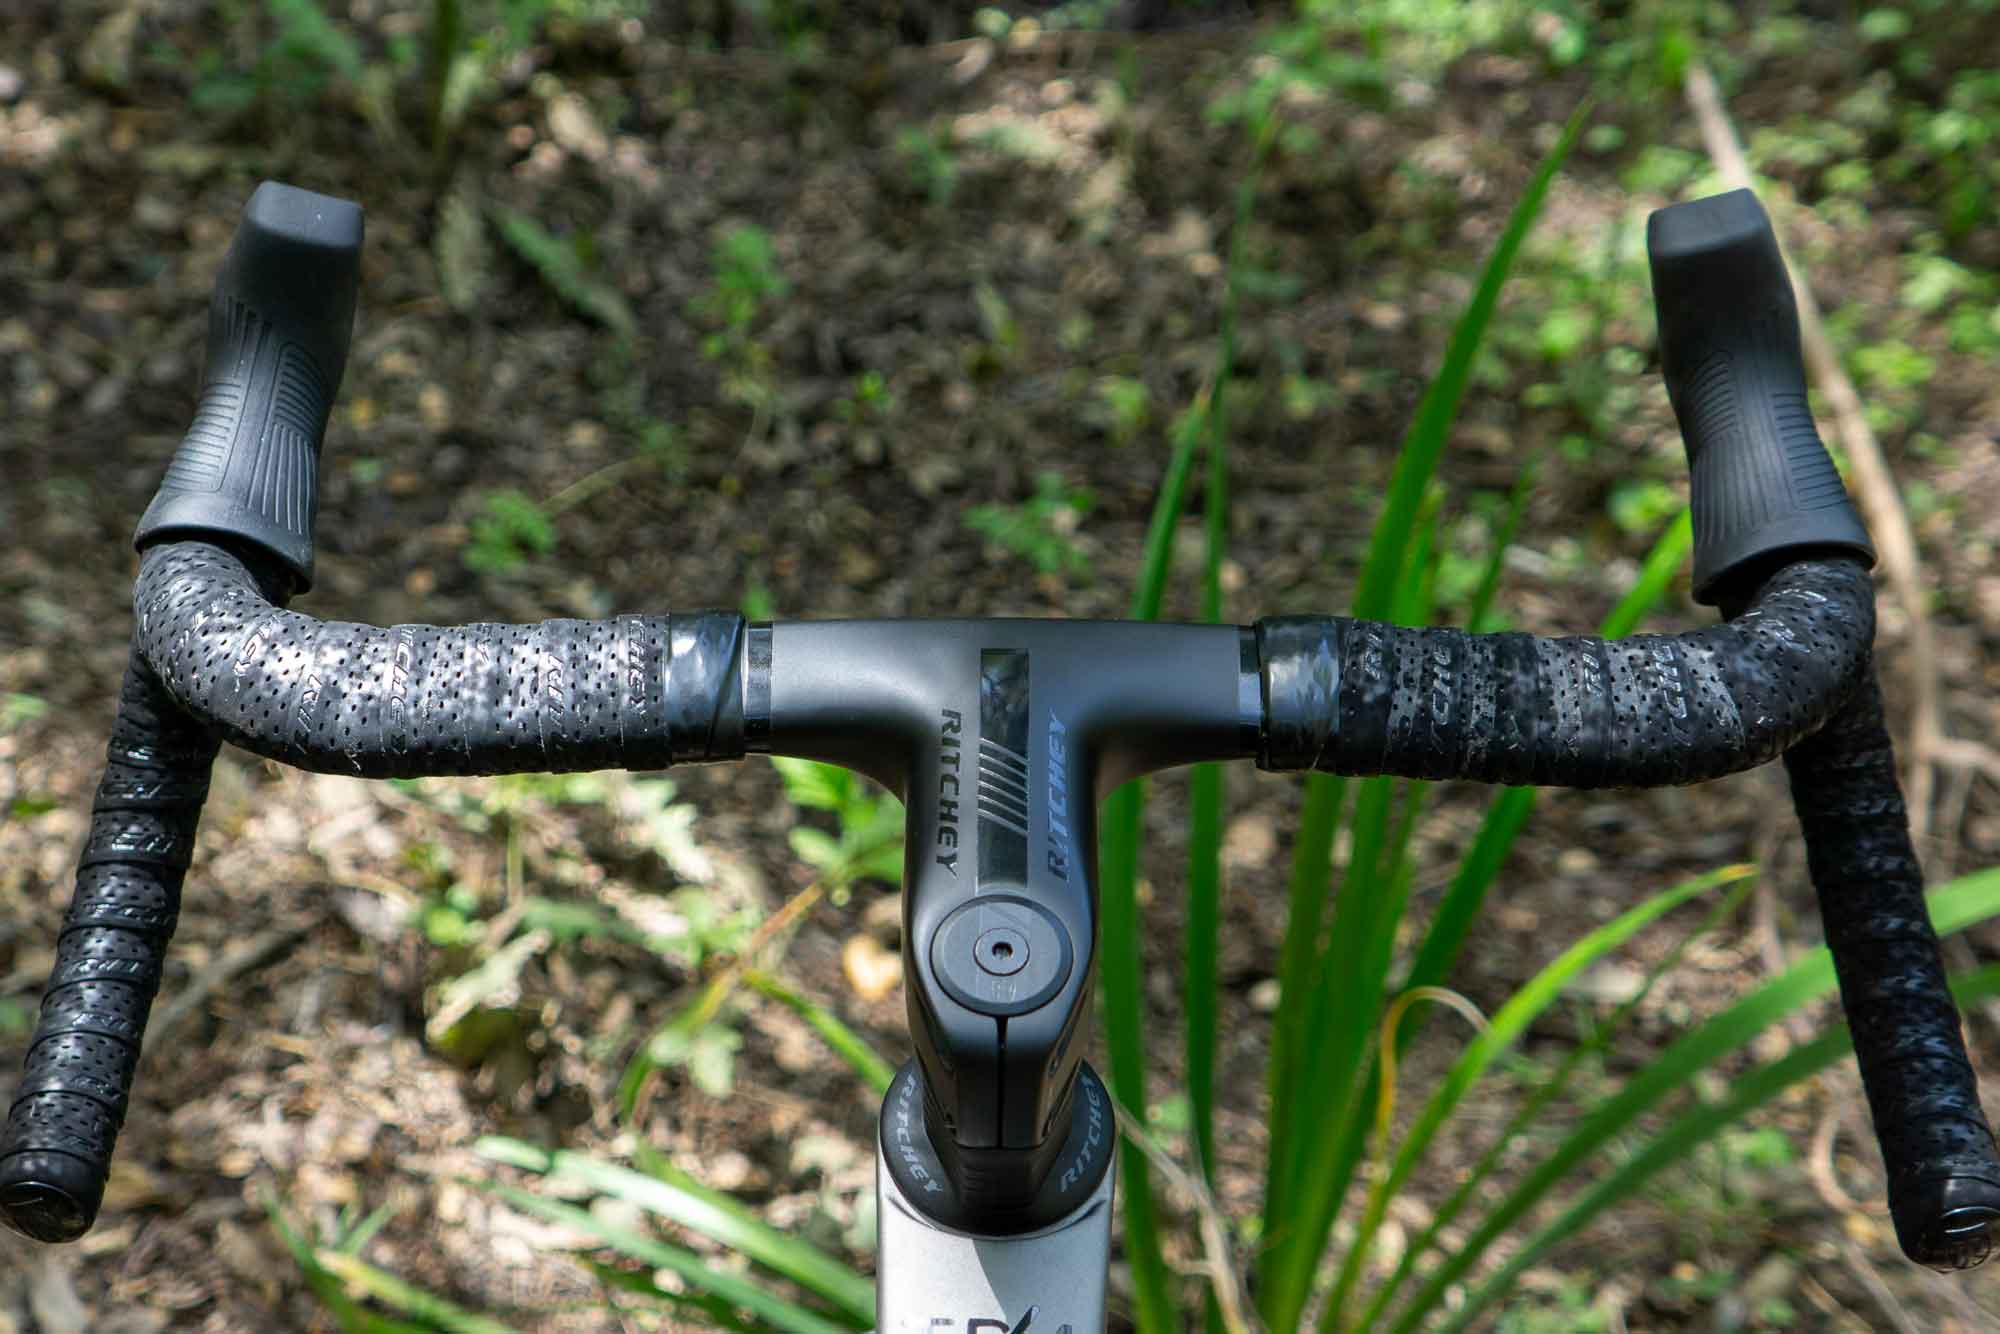 The new ritchey gravel handlebars from the rider's point of view. The handlebar/stem unit gives the new ritchey superlogic butano ridge an incredibly sleek look!